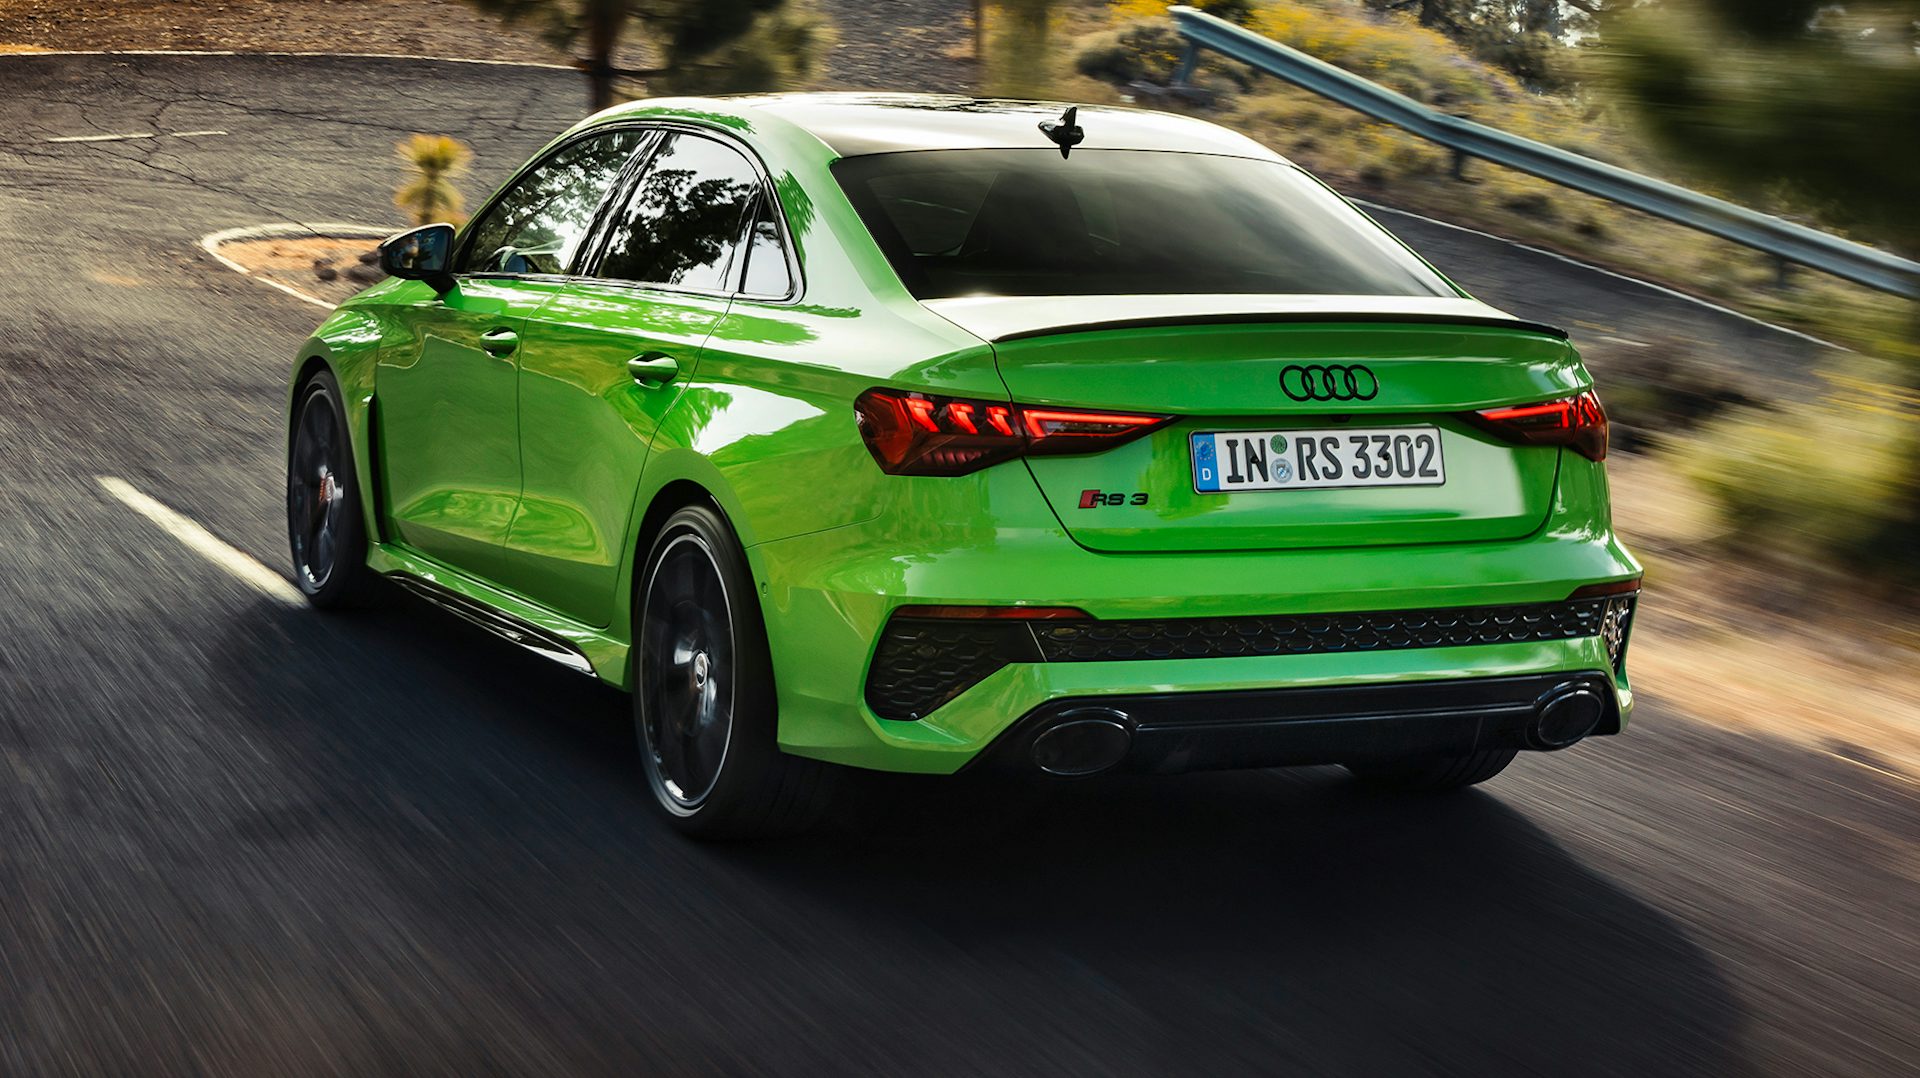 2022 Audi RS3 hot hatch and saloon revealed: price, specs and release